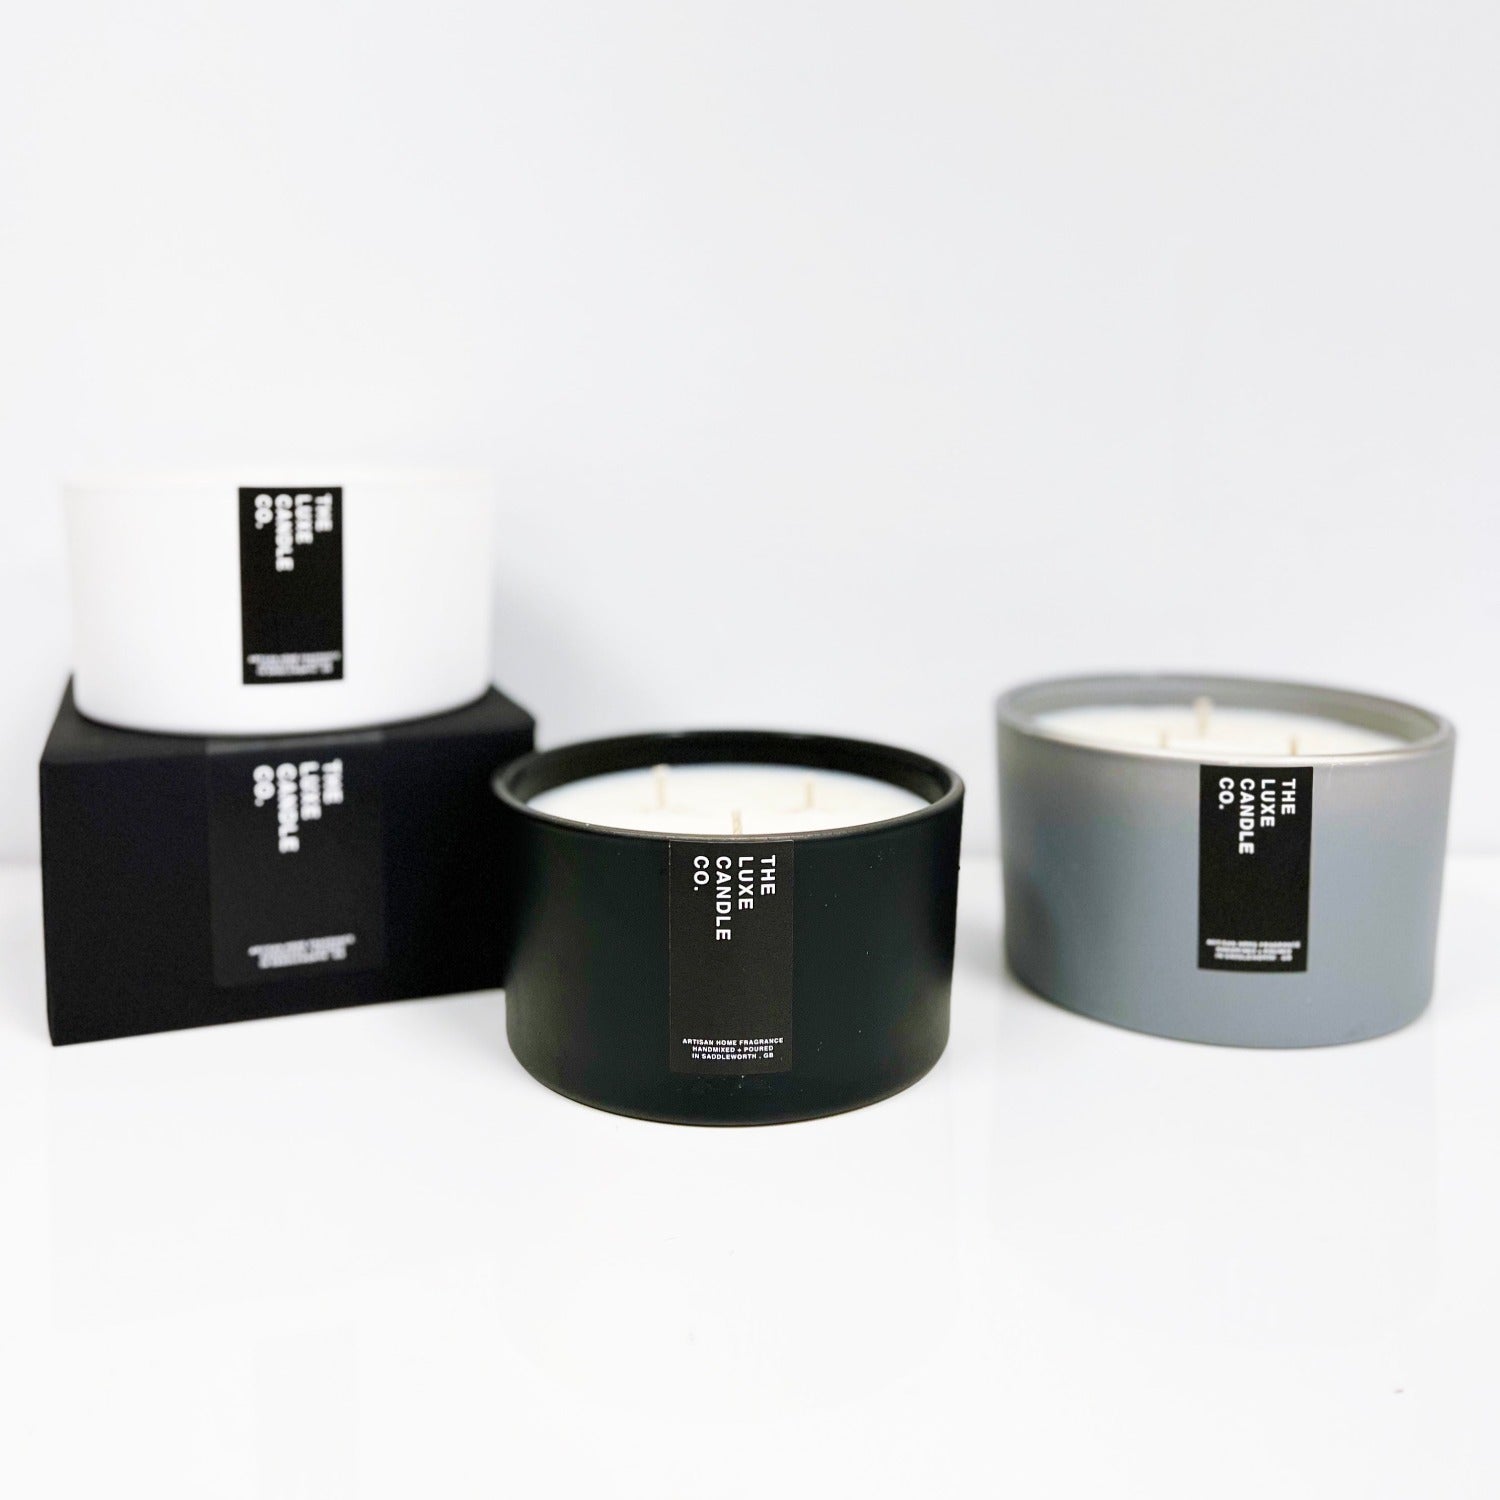 Multiwick large scented candles - white black and grey 3 wicks soy candle by The Luxe Candle Co